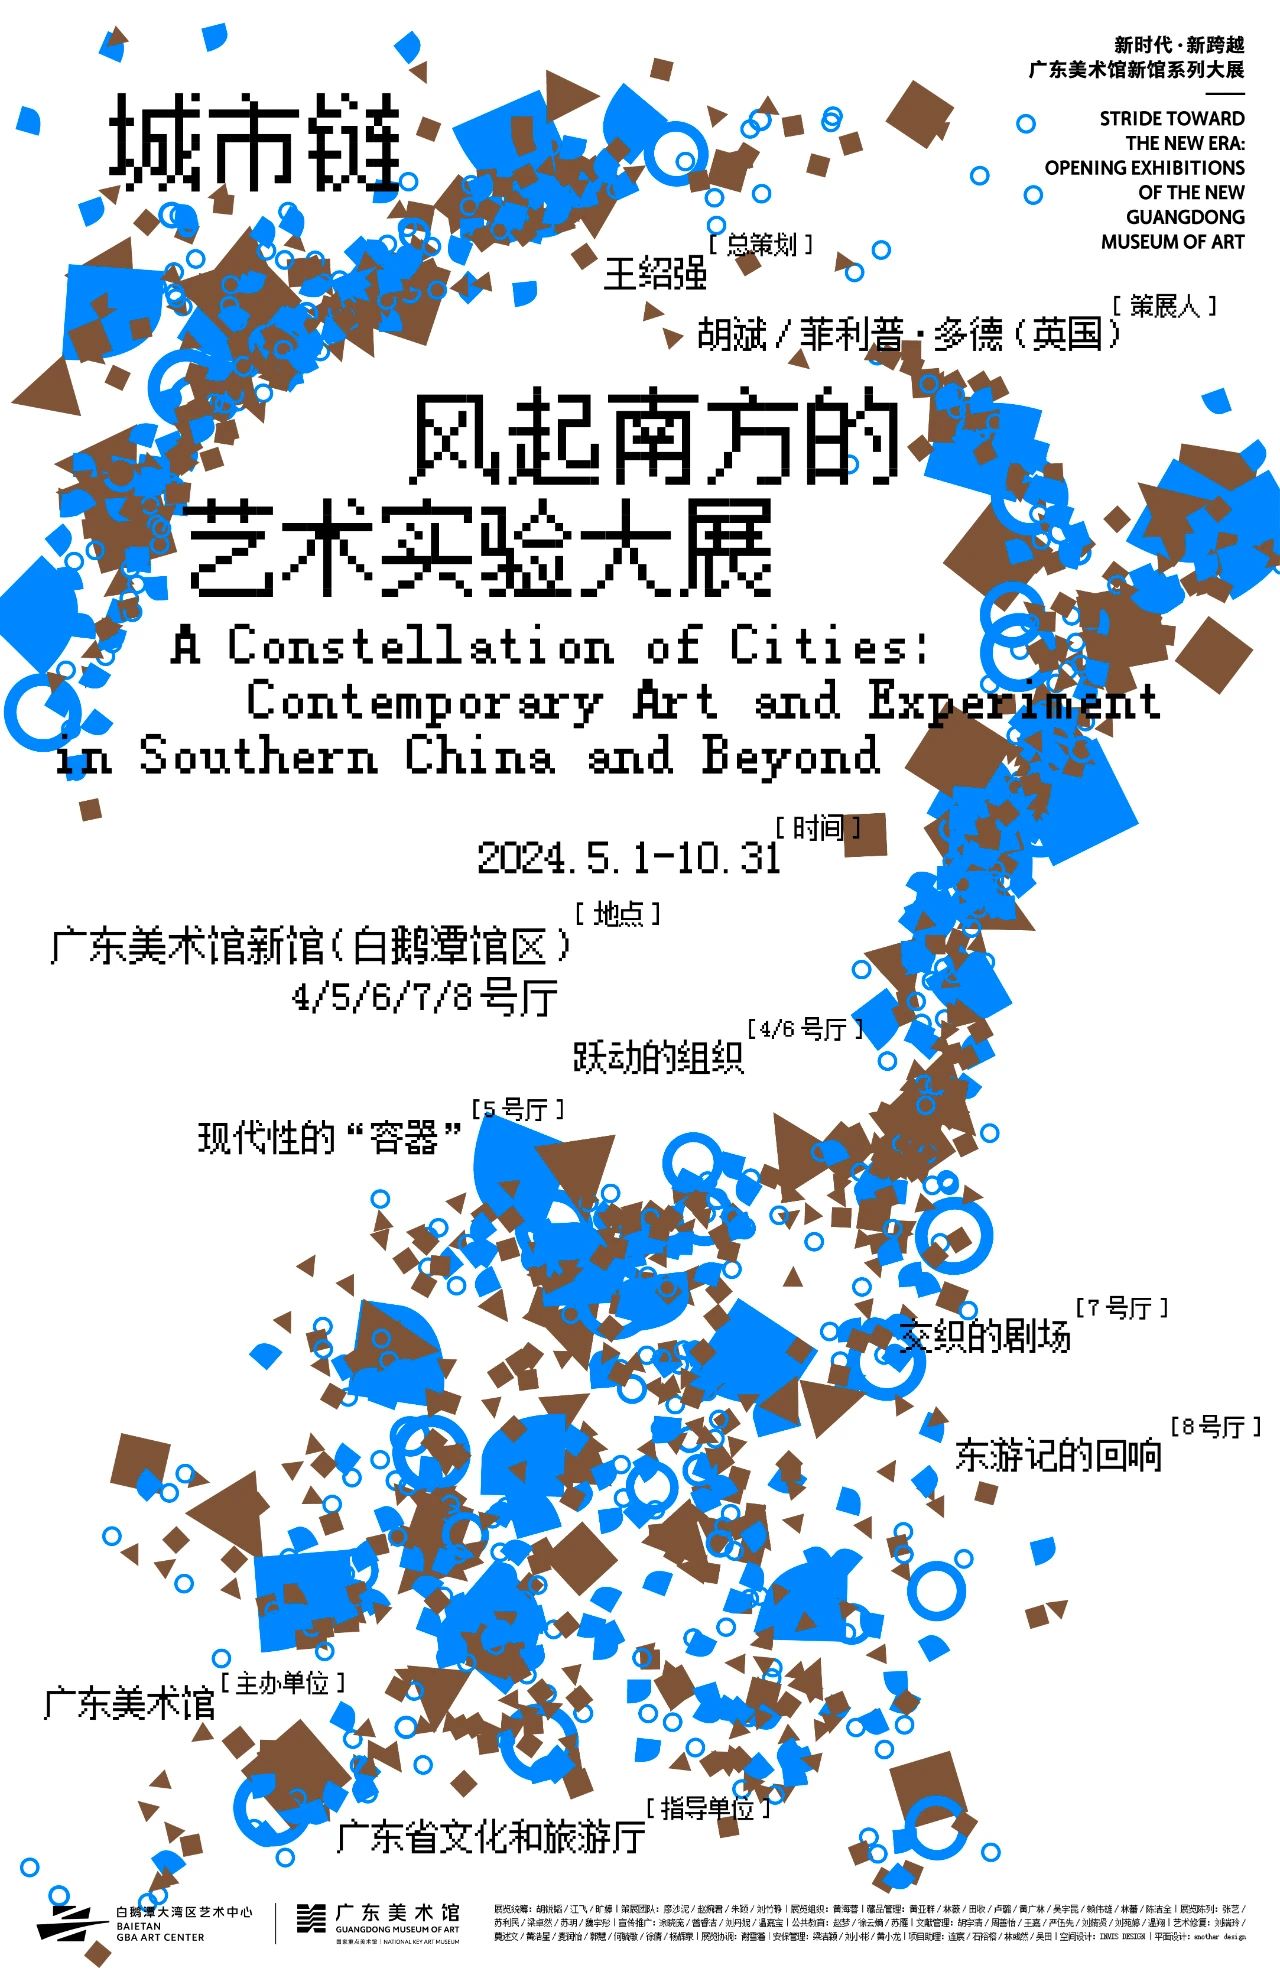 A-Constellation-of-cities-Contemporary-Art-and-Experiment-in-Southern-China-and-Beyond.jpg